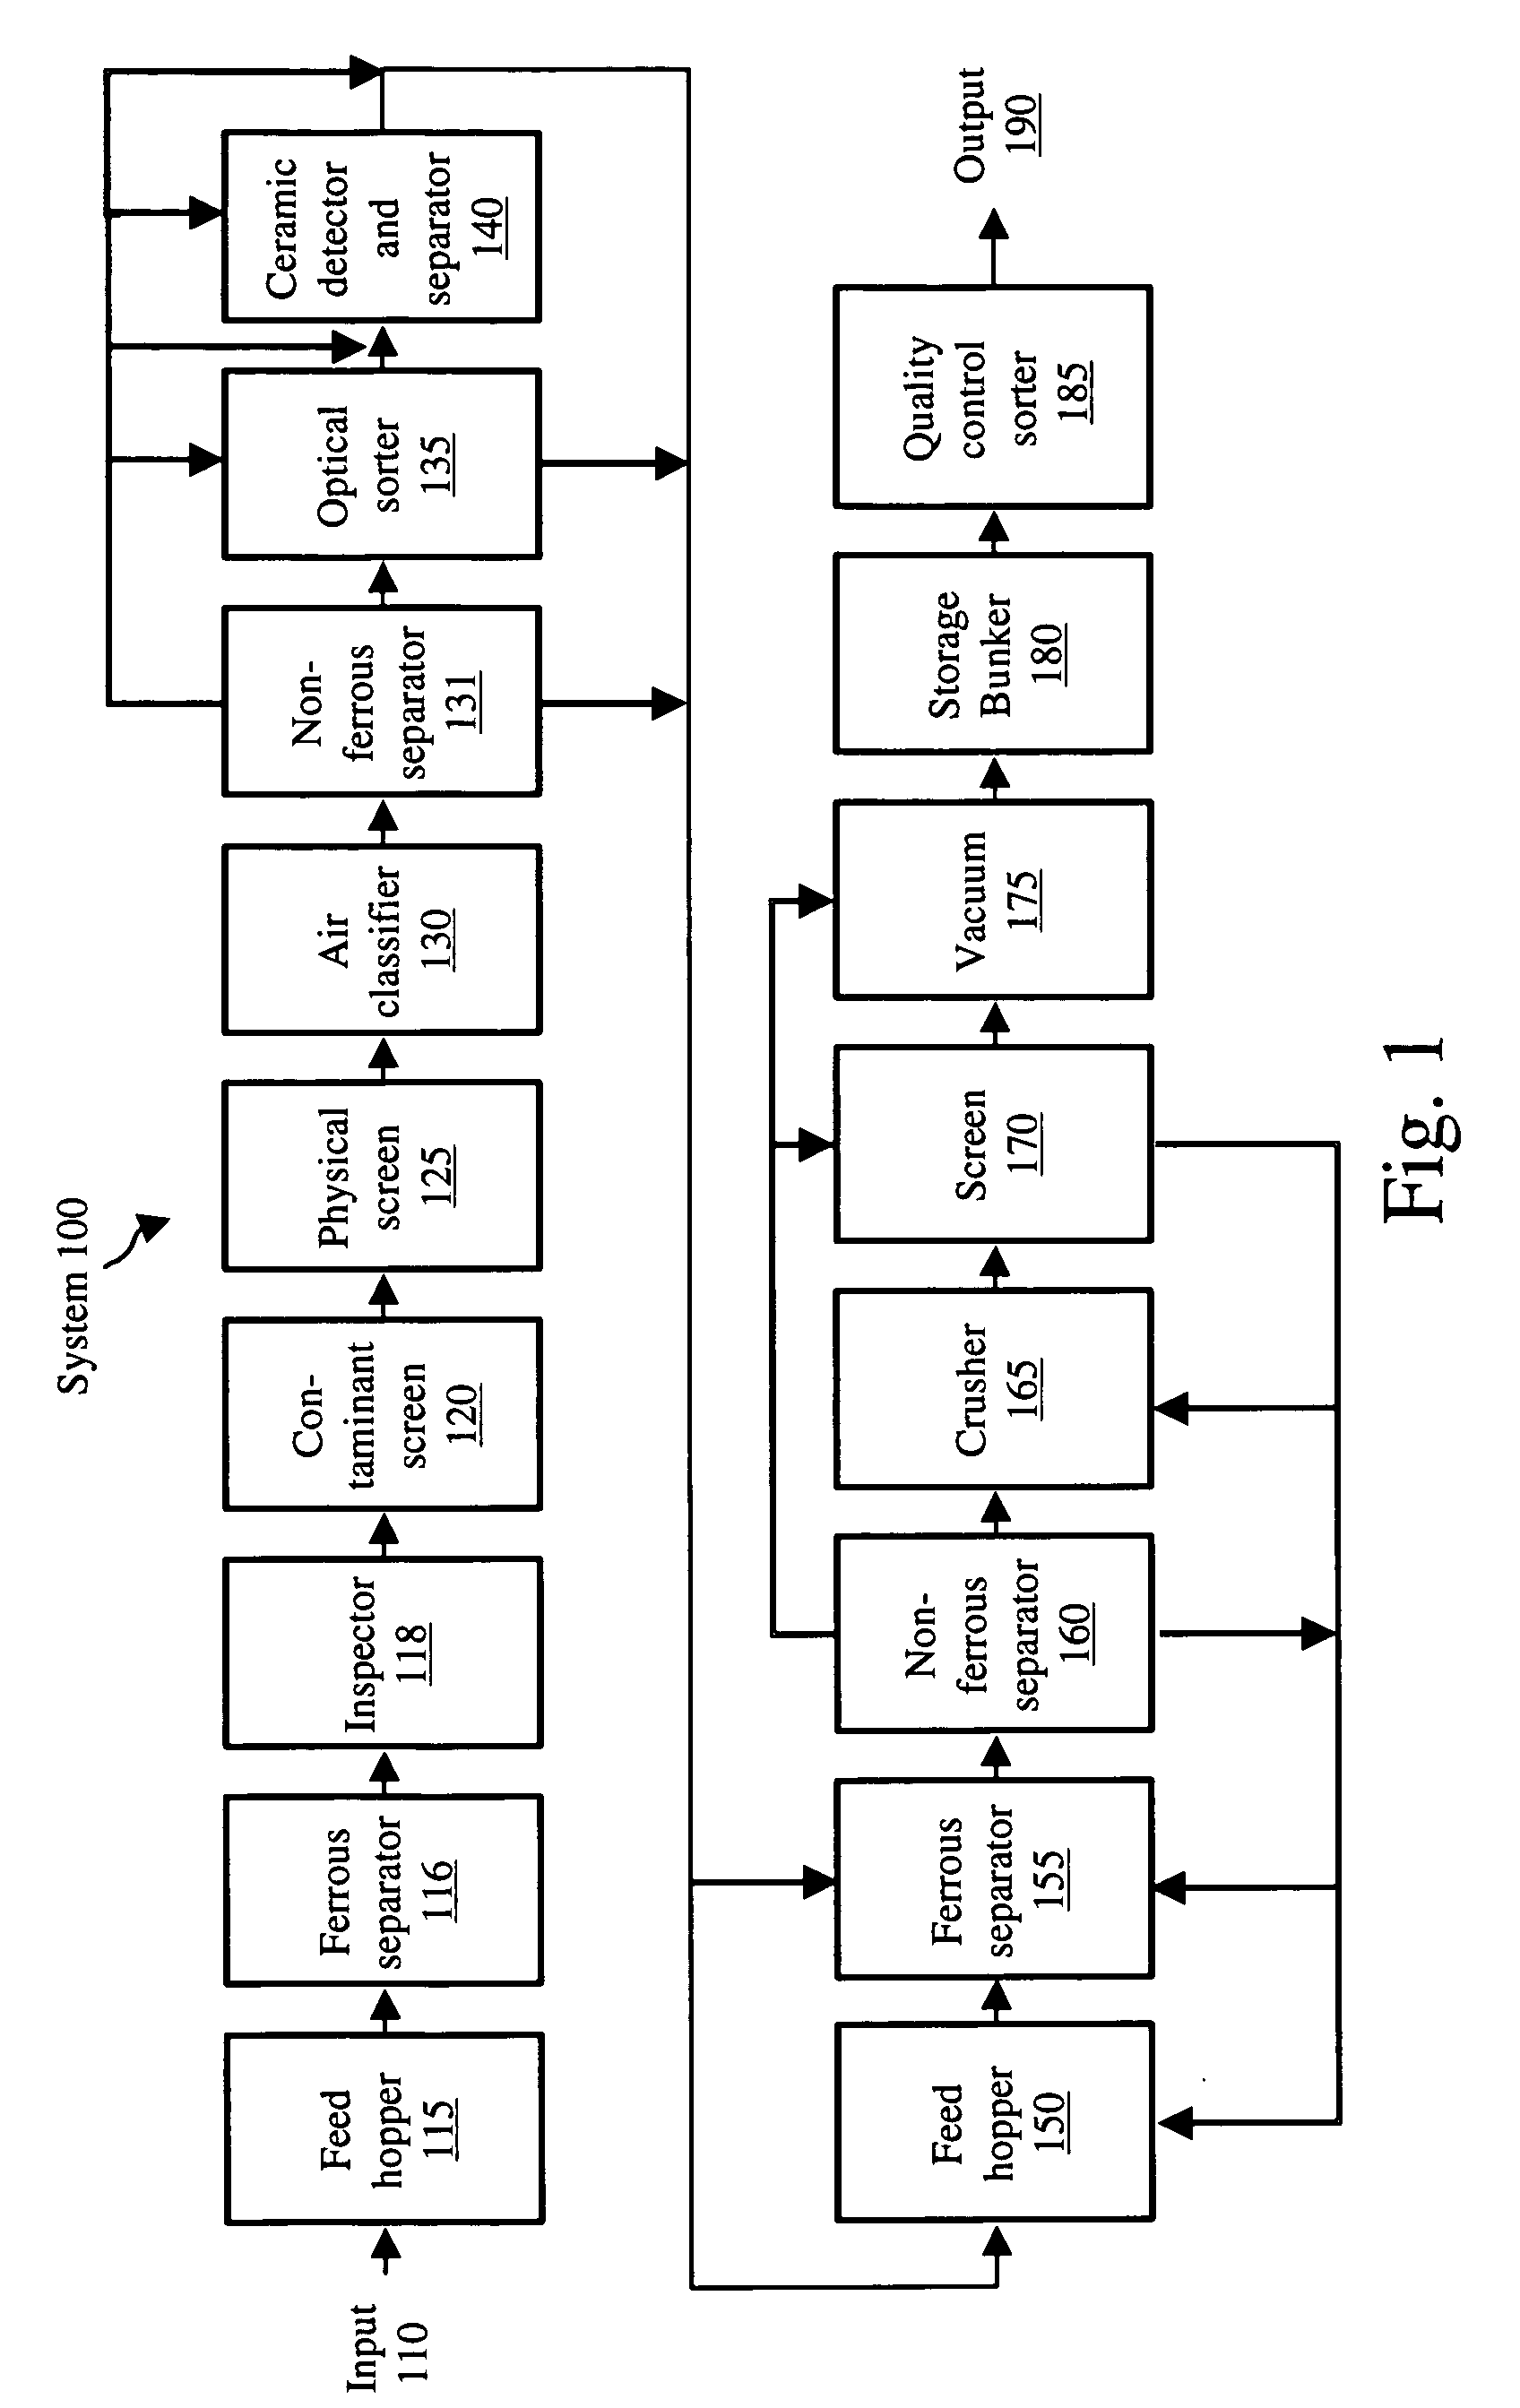 Systems and methods for glass recycling at a beneficiator and/or a material recovery facility